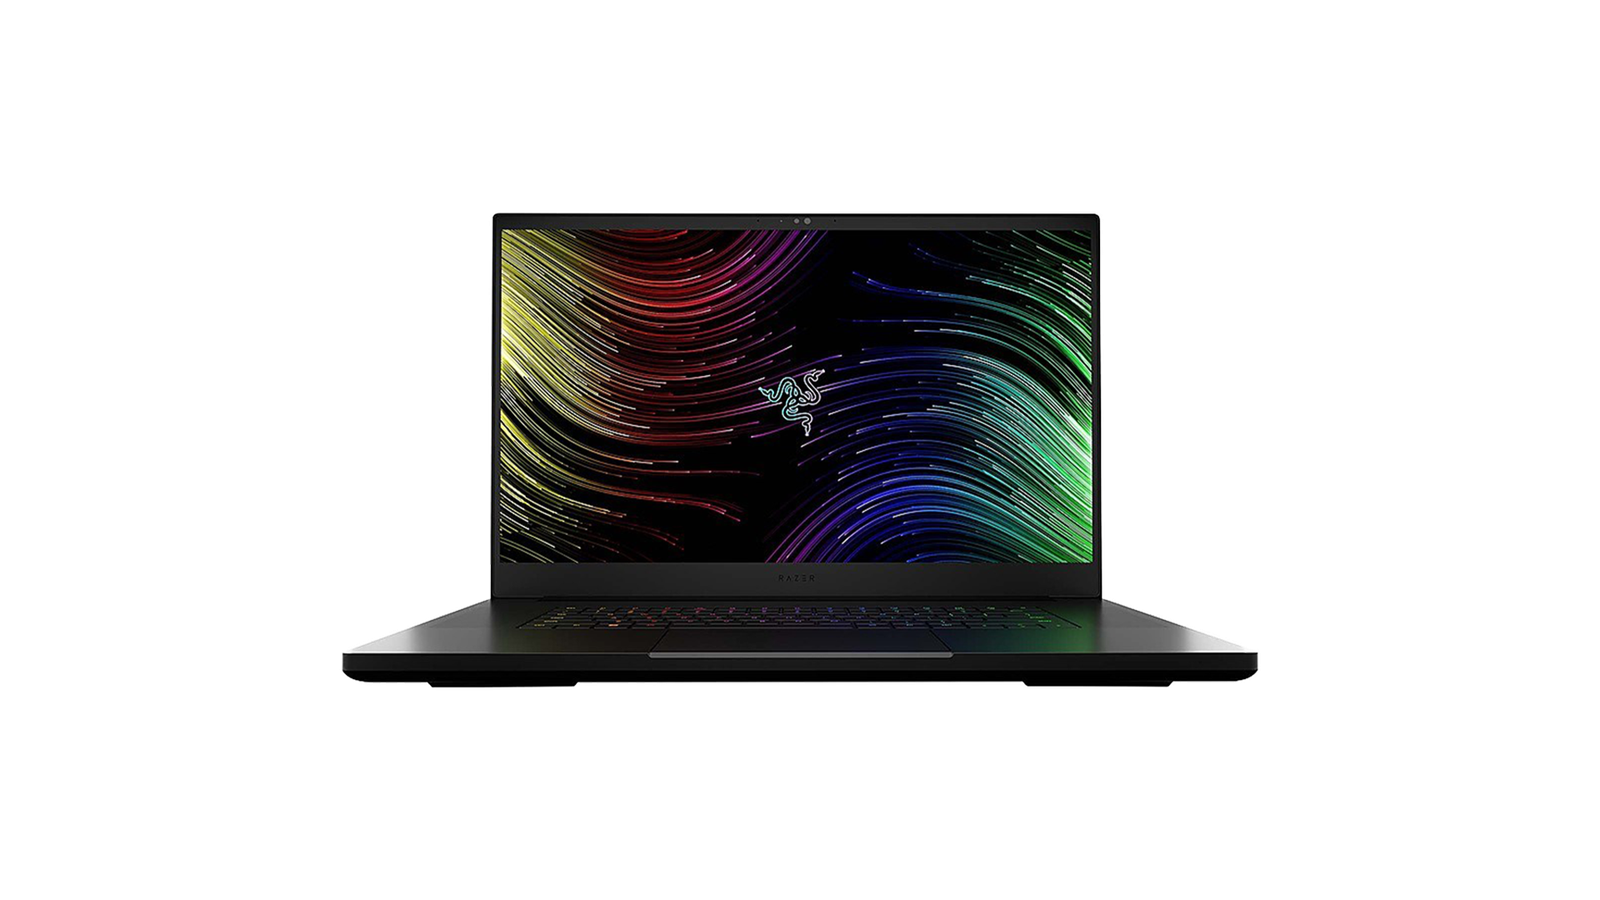 Razer Blade 17 - If you don't mind paying a premium, this is the greatest gaming laptop.